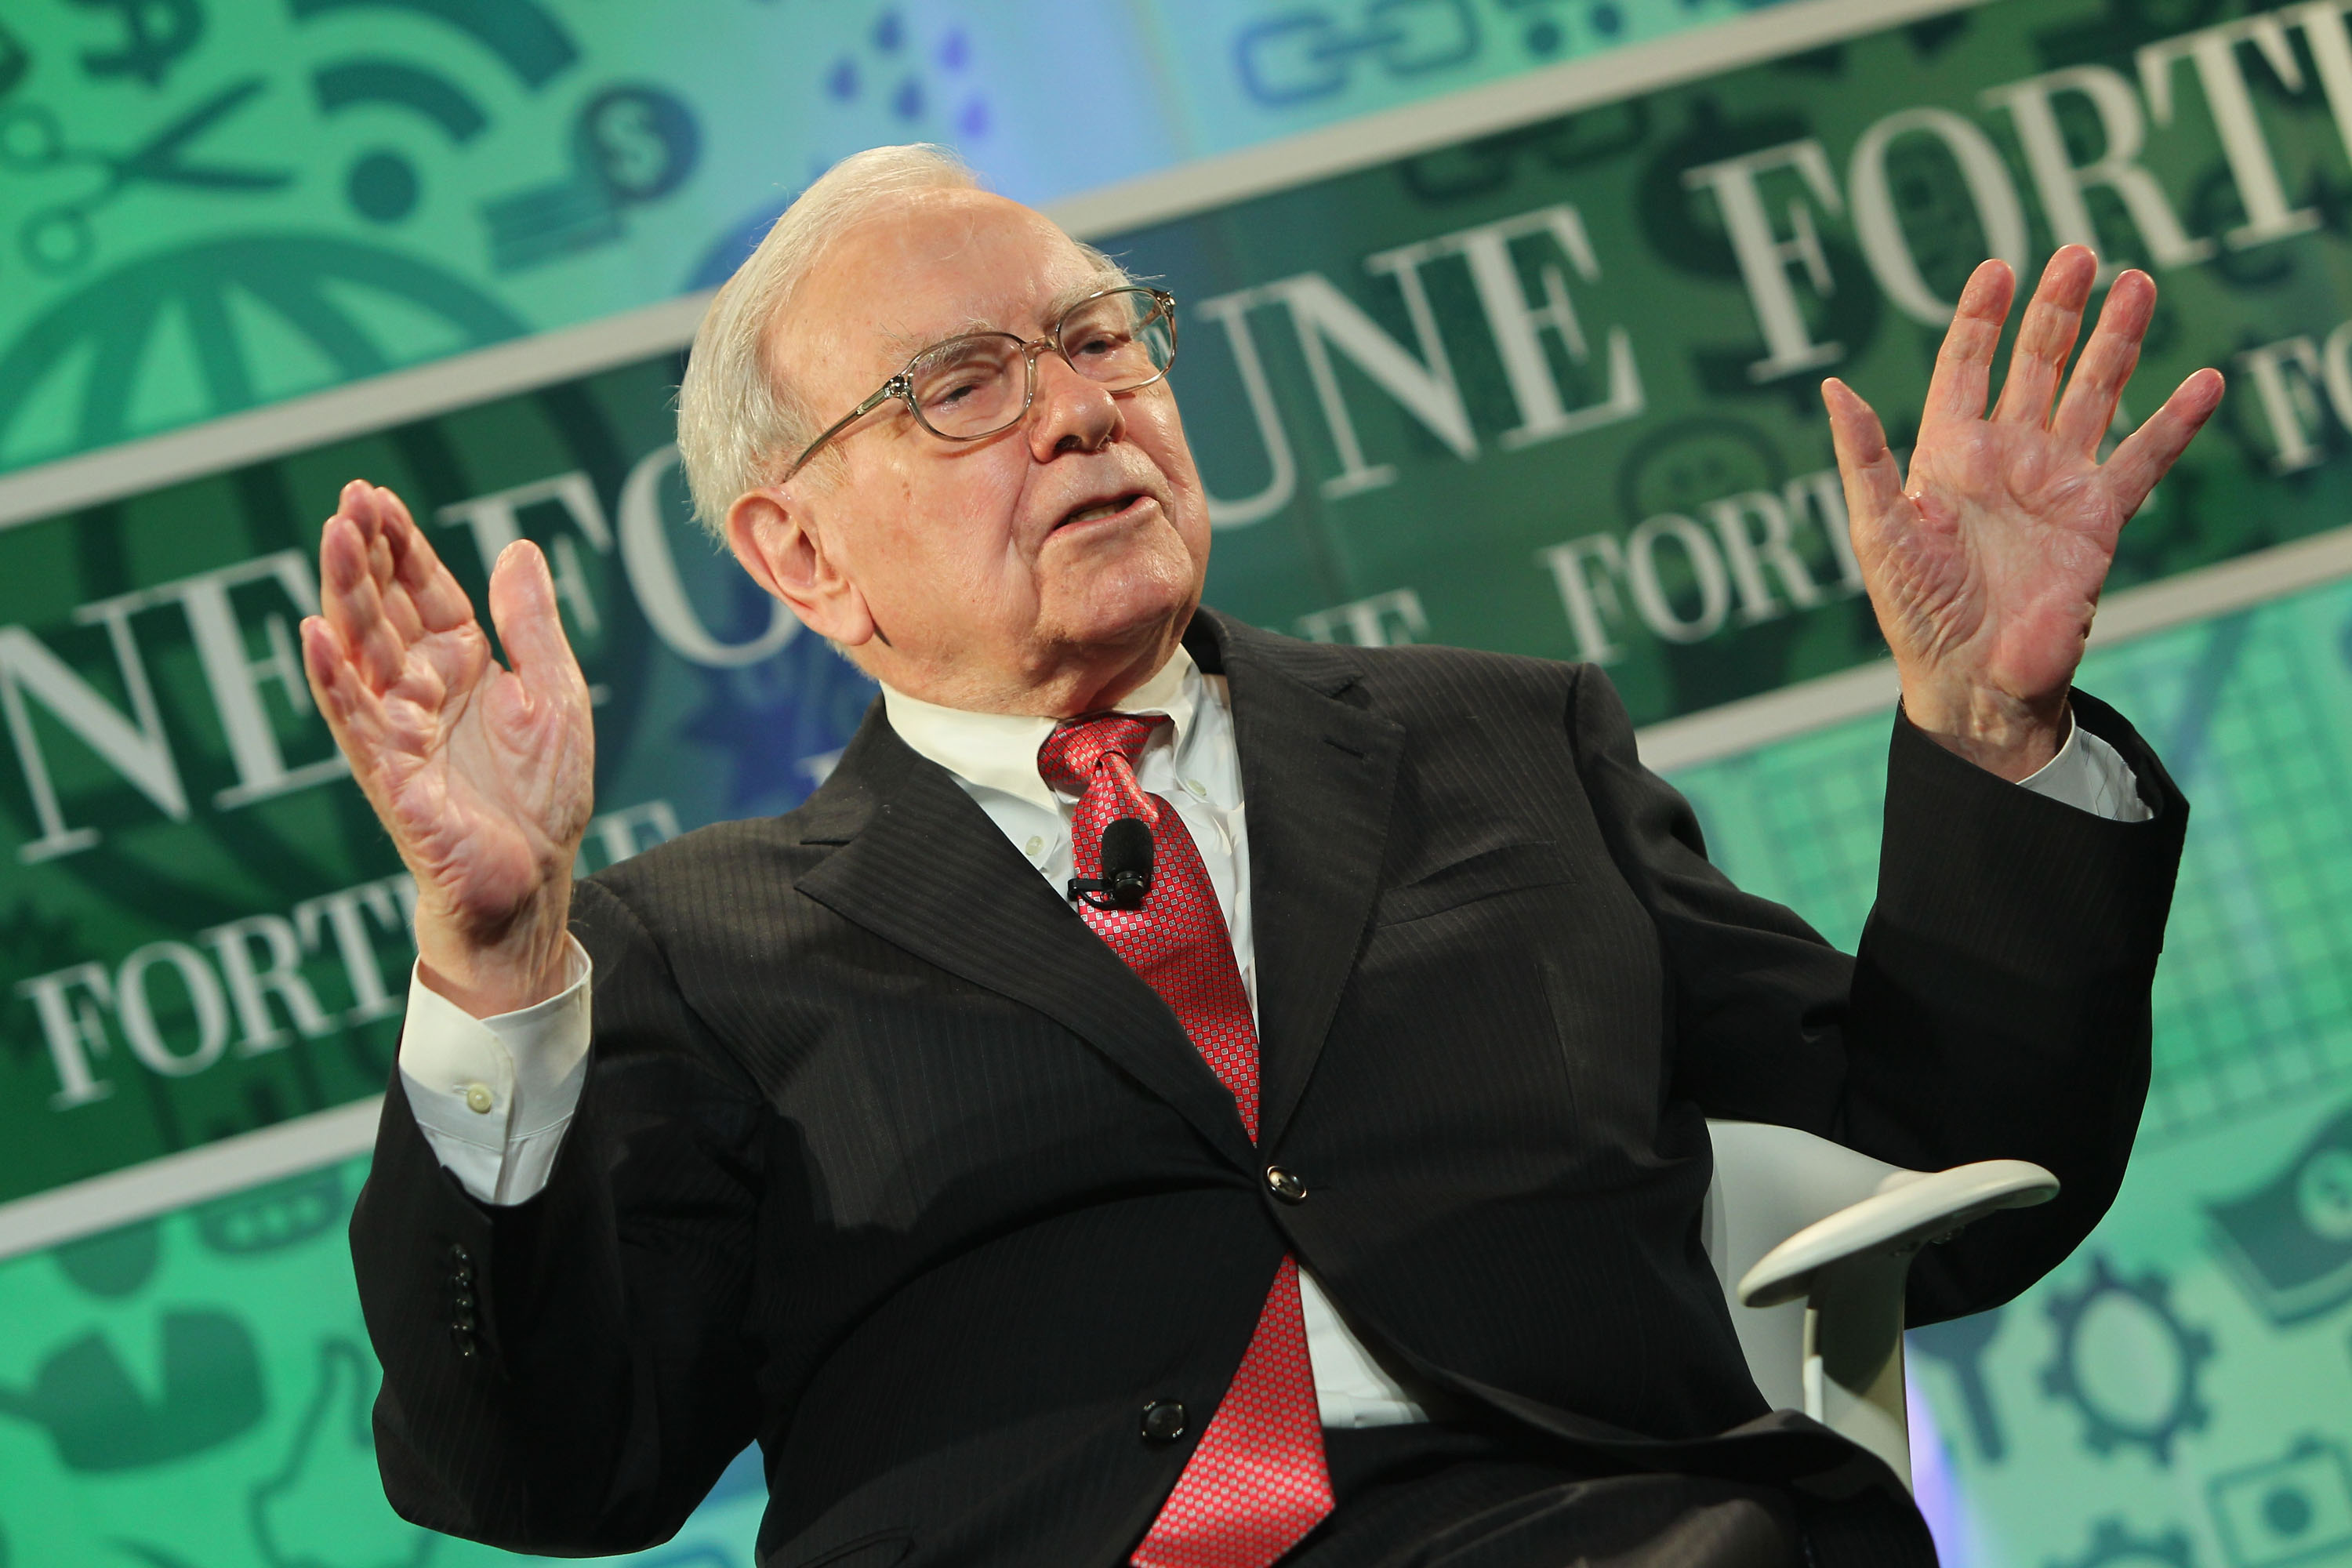 Mr. Buffett doesn't really get it wrong, just doesn't seem to get it. [Getty Images]